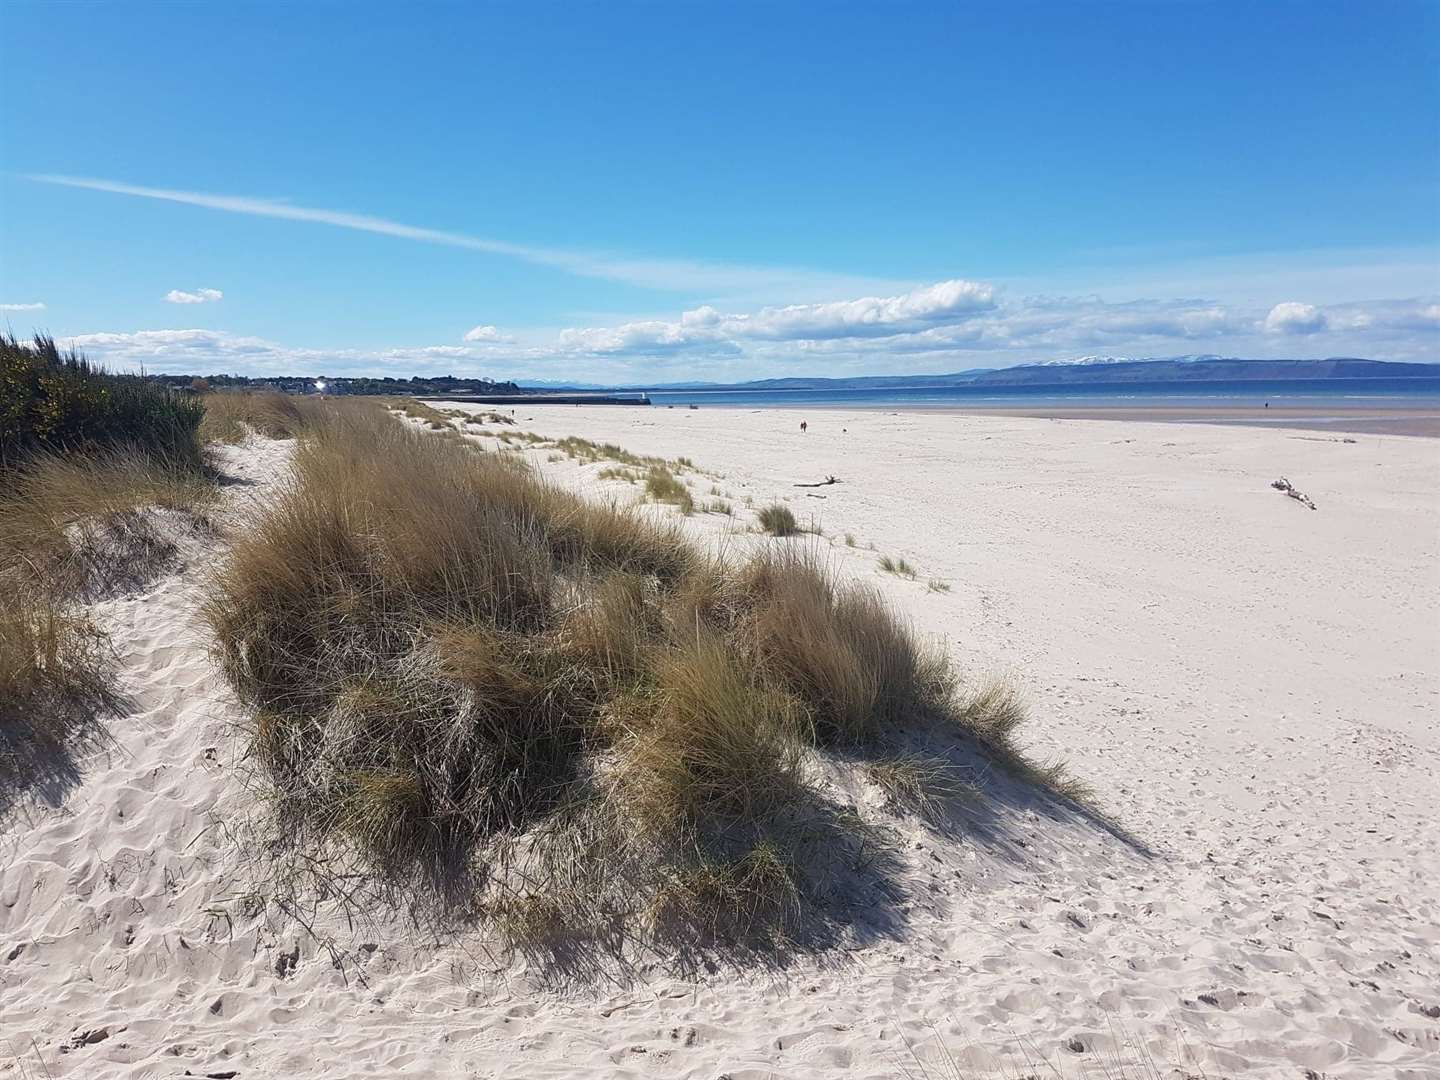 Sand dunes from the King’s Steps end of Nairn beach.